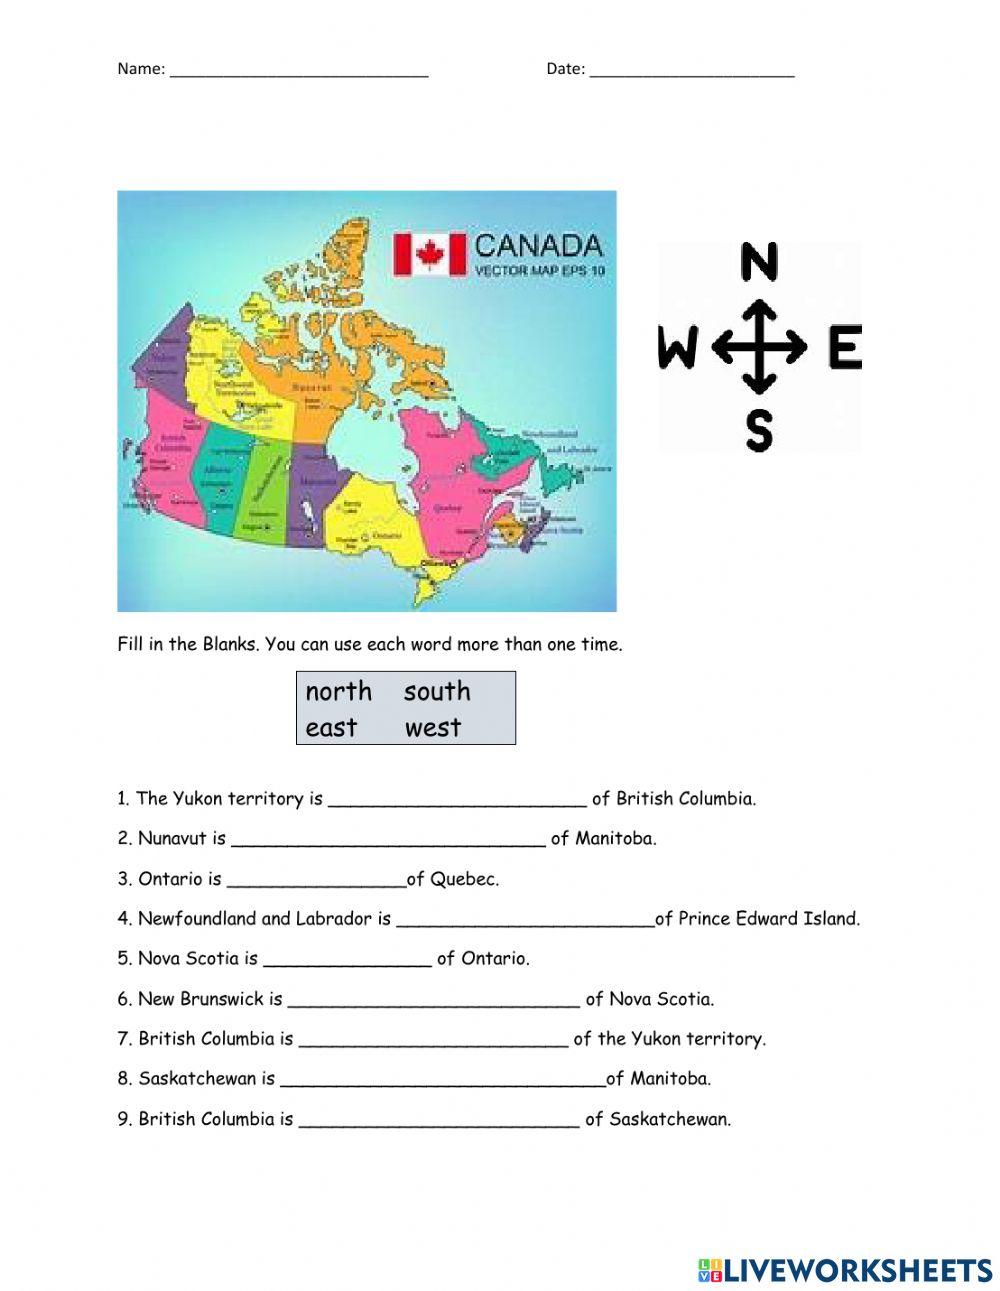 Reading map of Canada